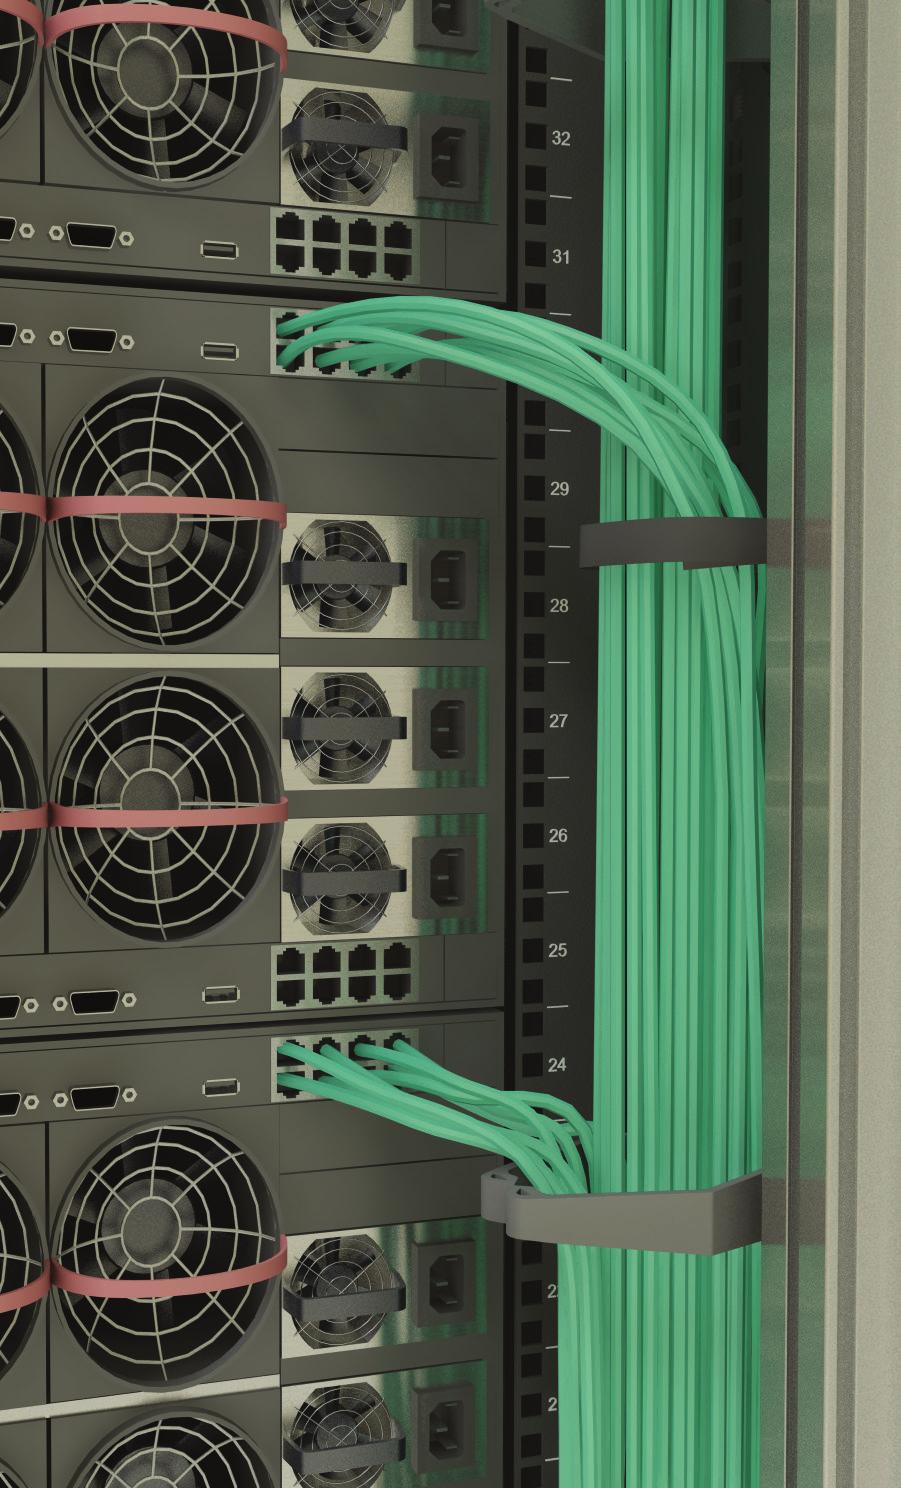 APPLYING PROPER CABLE MANAGEMENT IN IT RACKS Why Proper Cable Management Is So Important Your rack cabling systems are the lifelines of your IT operations.